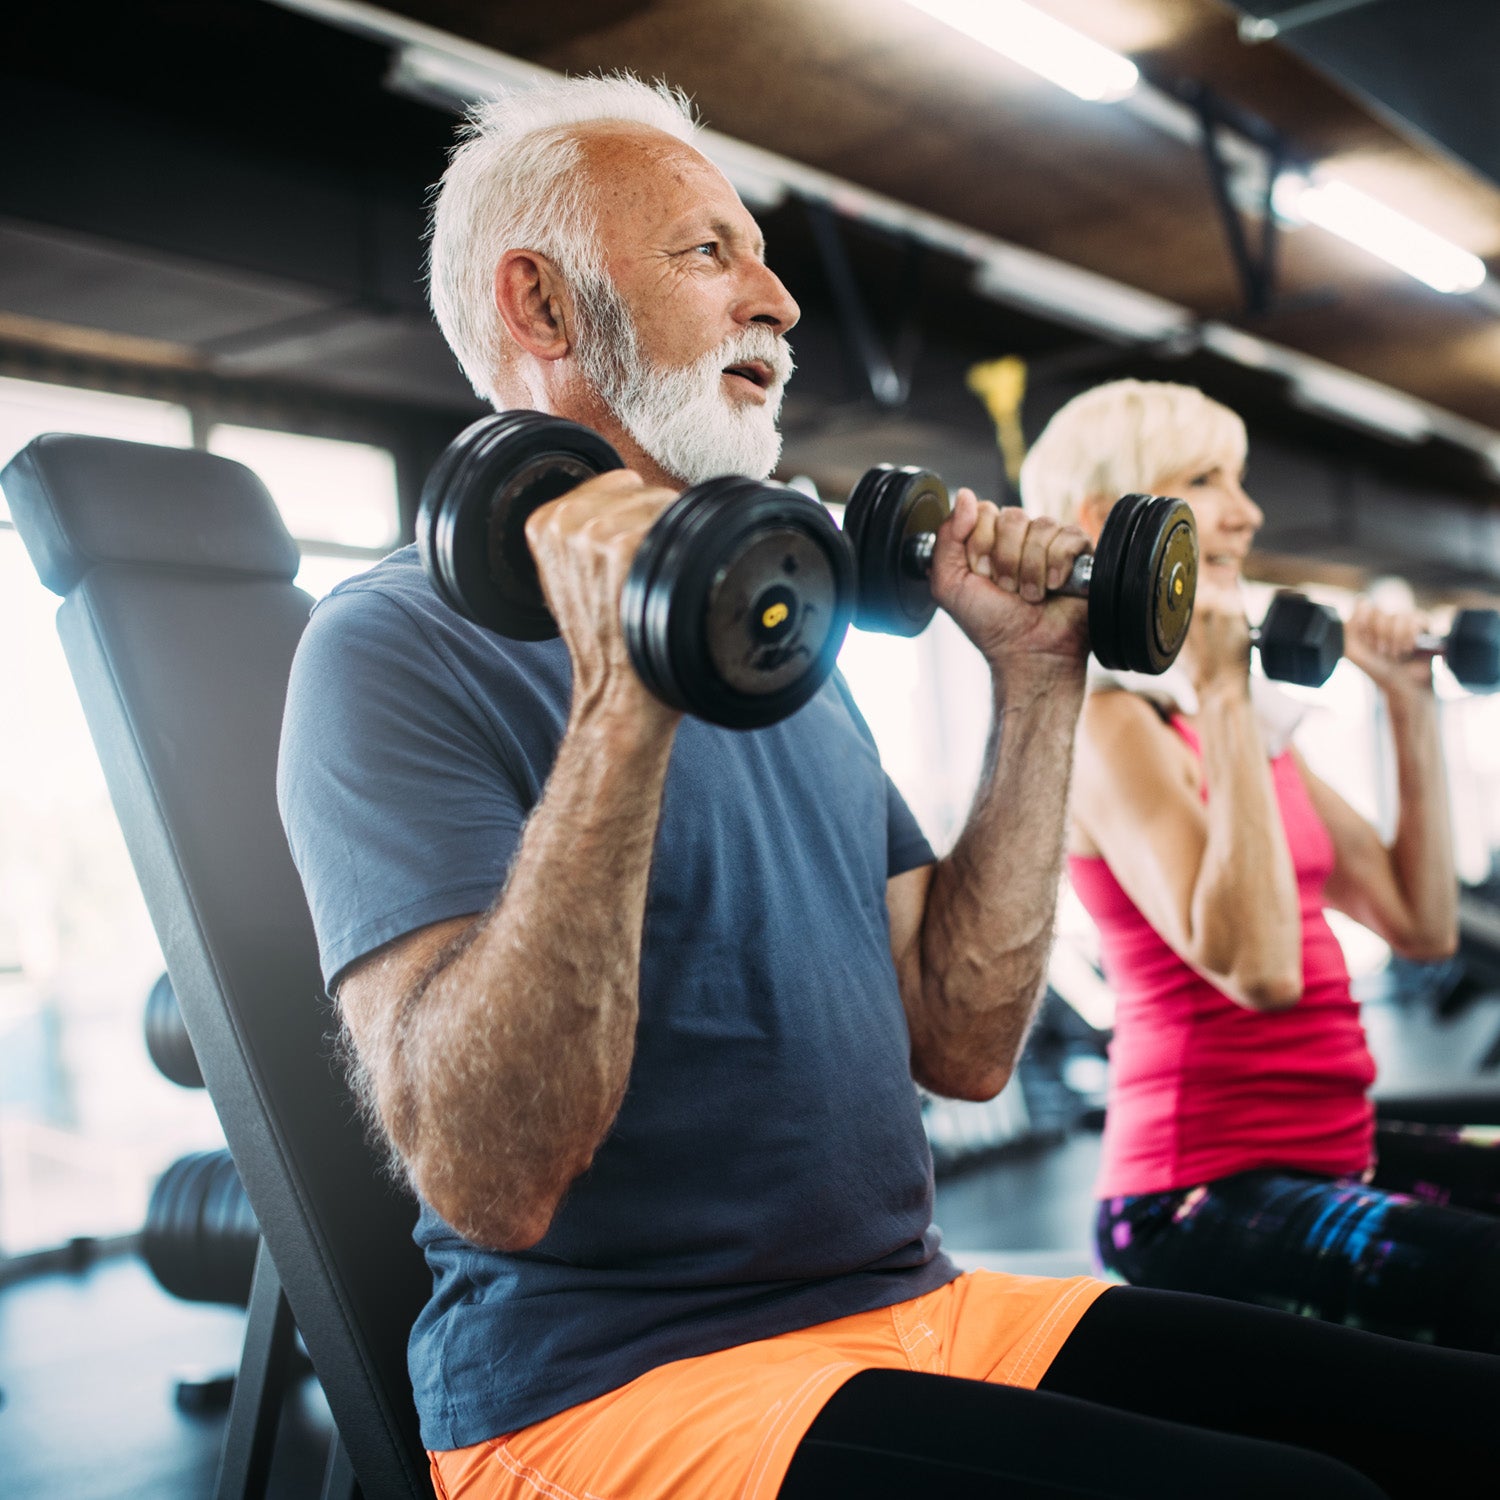 Exercise Boosts Cognitive Function In Older Adults, New Study Confirms –  Built for Athletes™